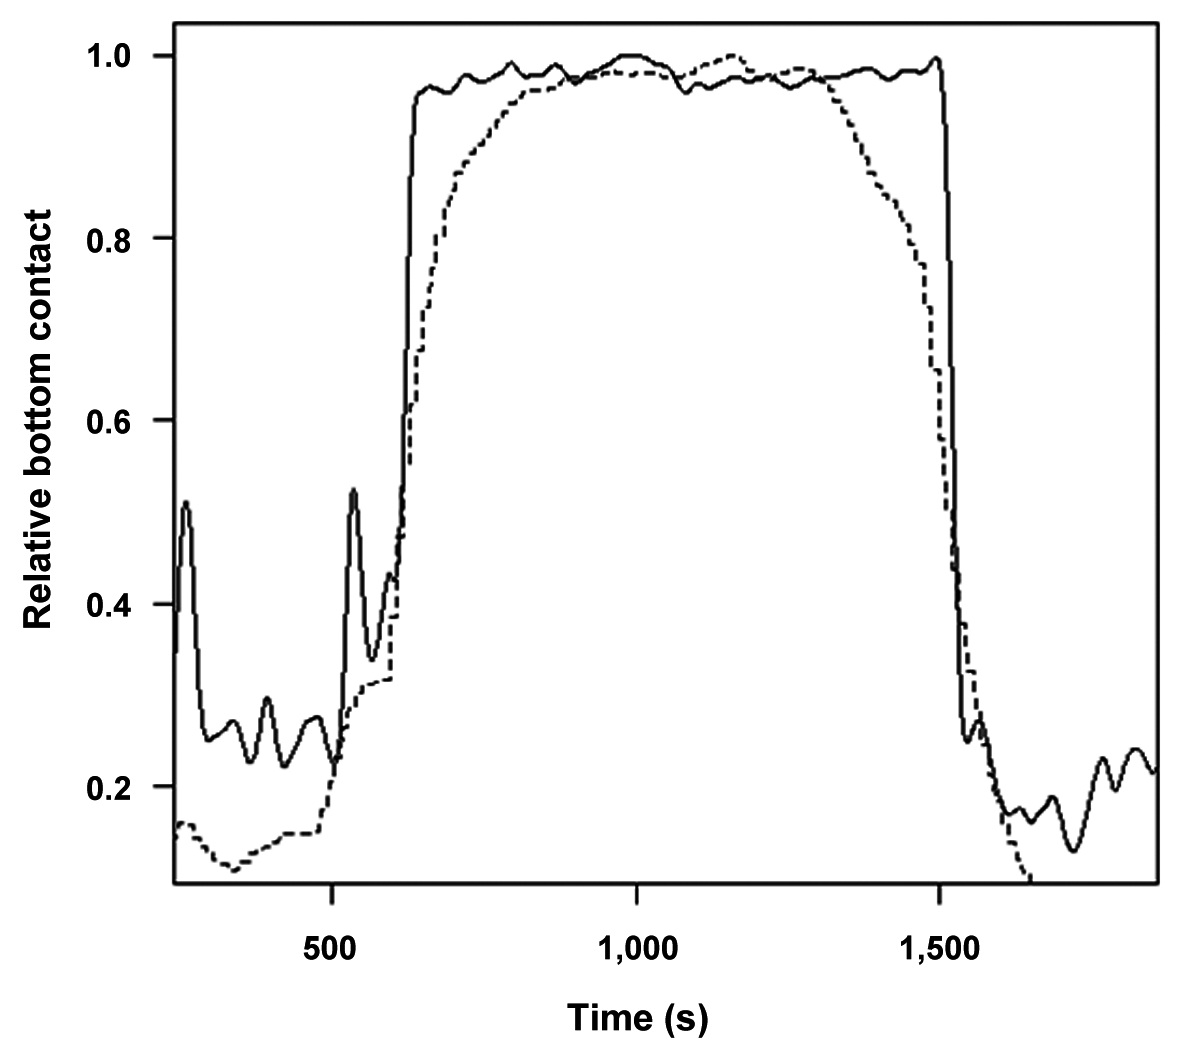 Tilt angles measured by the bottom contact sensors (BCS) mounted at the center of the trawl footrope (dashed line) and the underbag footrope (solid line). Tilt angles were recorded once every second by the underbag BCS, but only once every second by the trawl BCS; both time series were subsequently smoothed. Note that the underbag footrope was just a chain, so that the BCS unit could lay flat on the bottom and therefore measure 90 degrees when the footrope was on the bottom; however, the trawl footrope was surrounded by 150 mm rubber disks, so the trawl BCS rested at an angle of about 60 degrees when the footrope rested on the bottom.